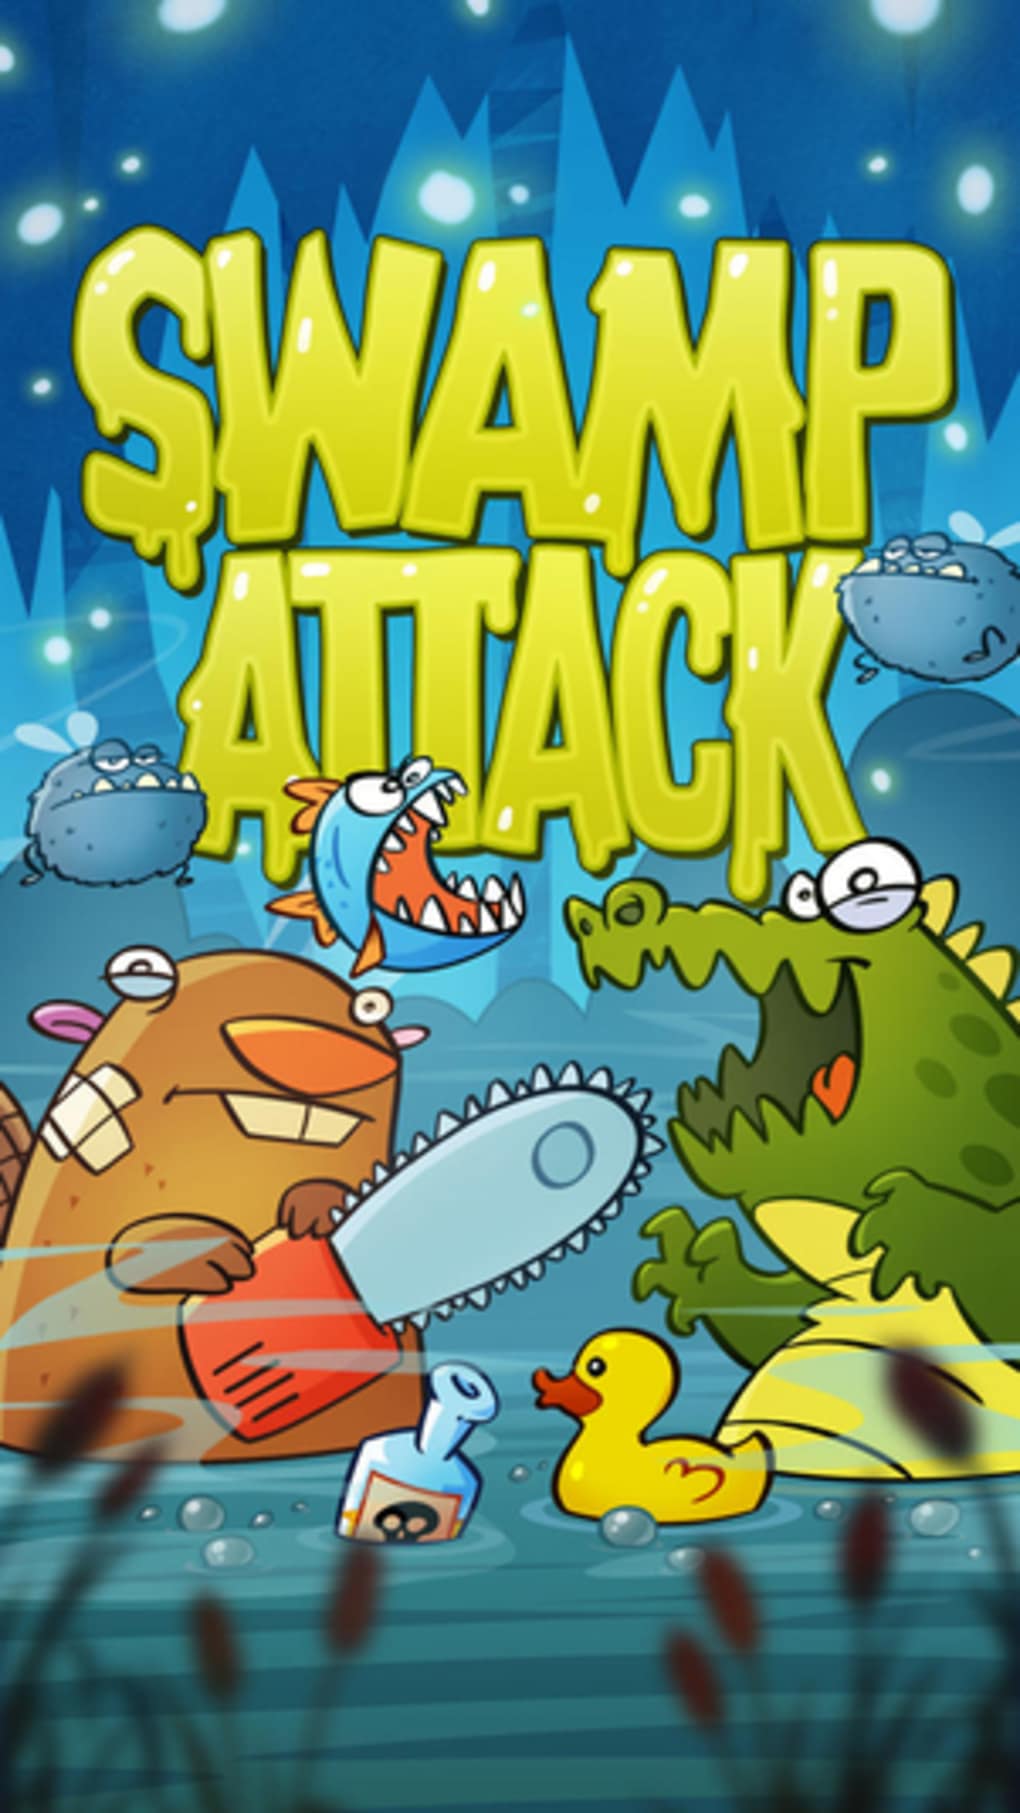 Swamp Attack 2 instal the last version for ipod